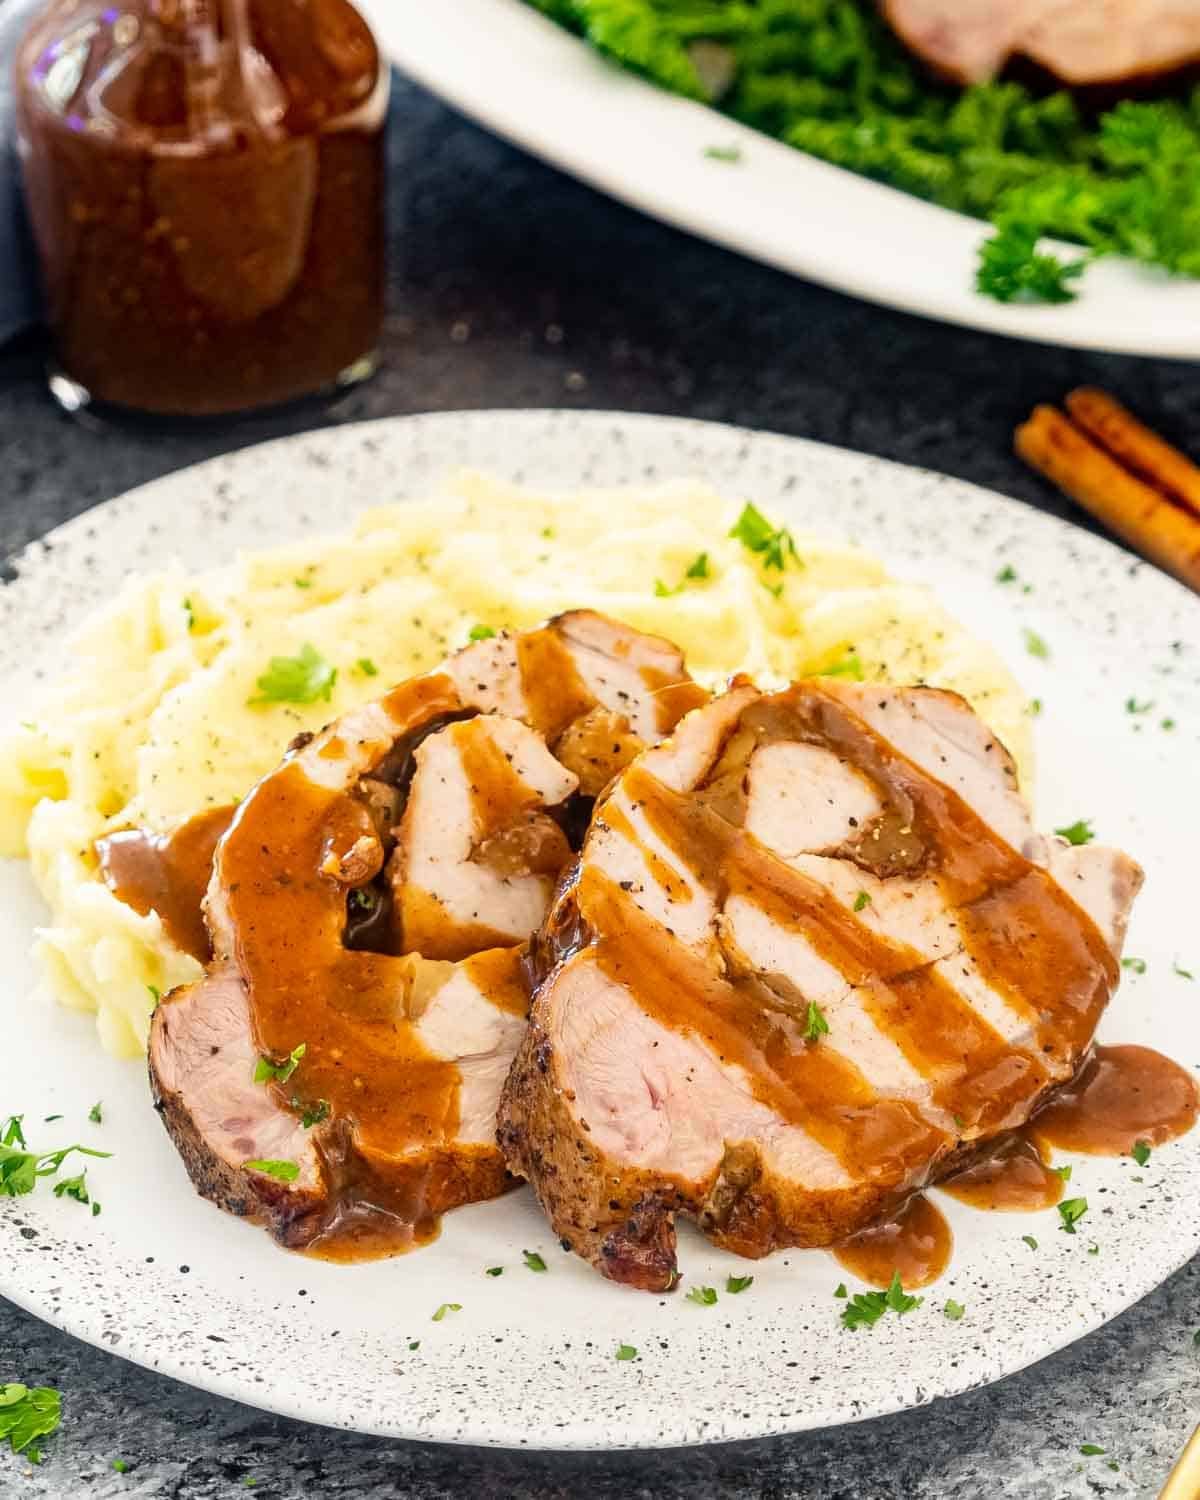 2 slices of apple stuffed pork loin with mashed potatoes on a plate.